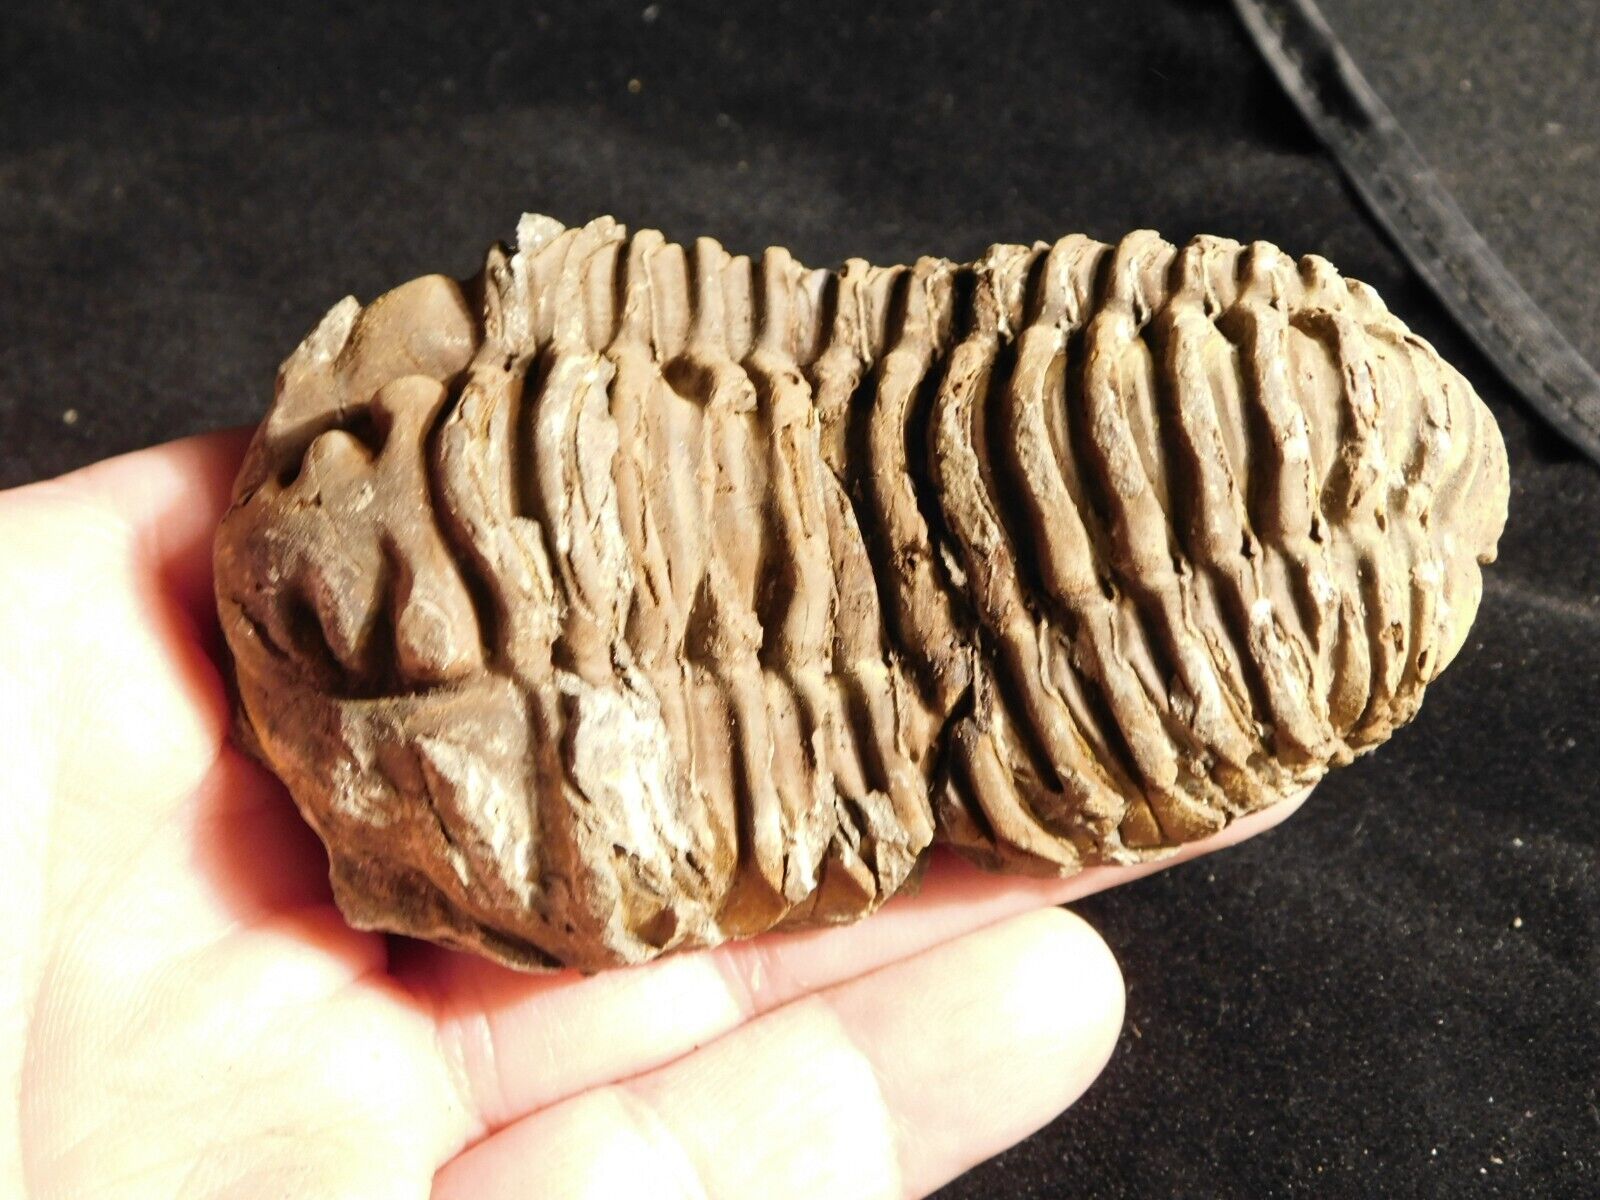 BIG 460 MILLION Year Old TRILOBITE Fossil From Morocco 167gr